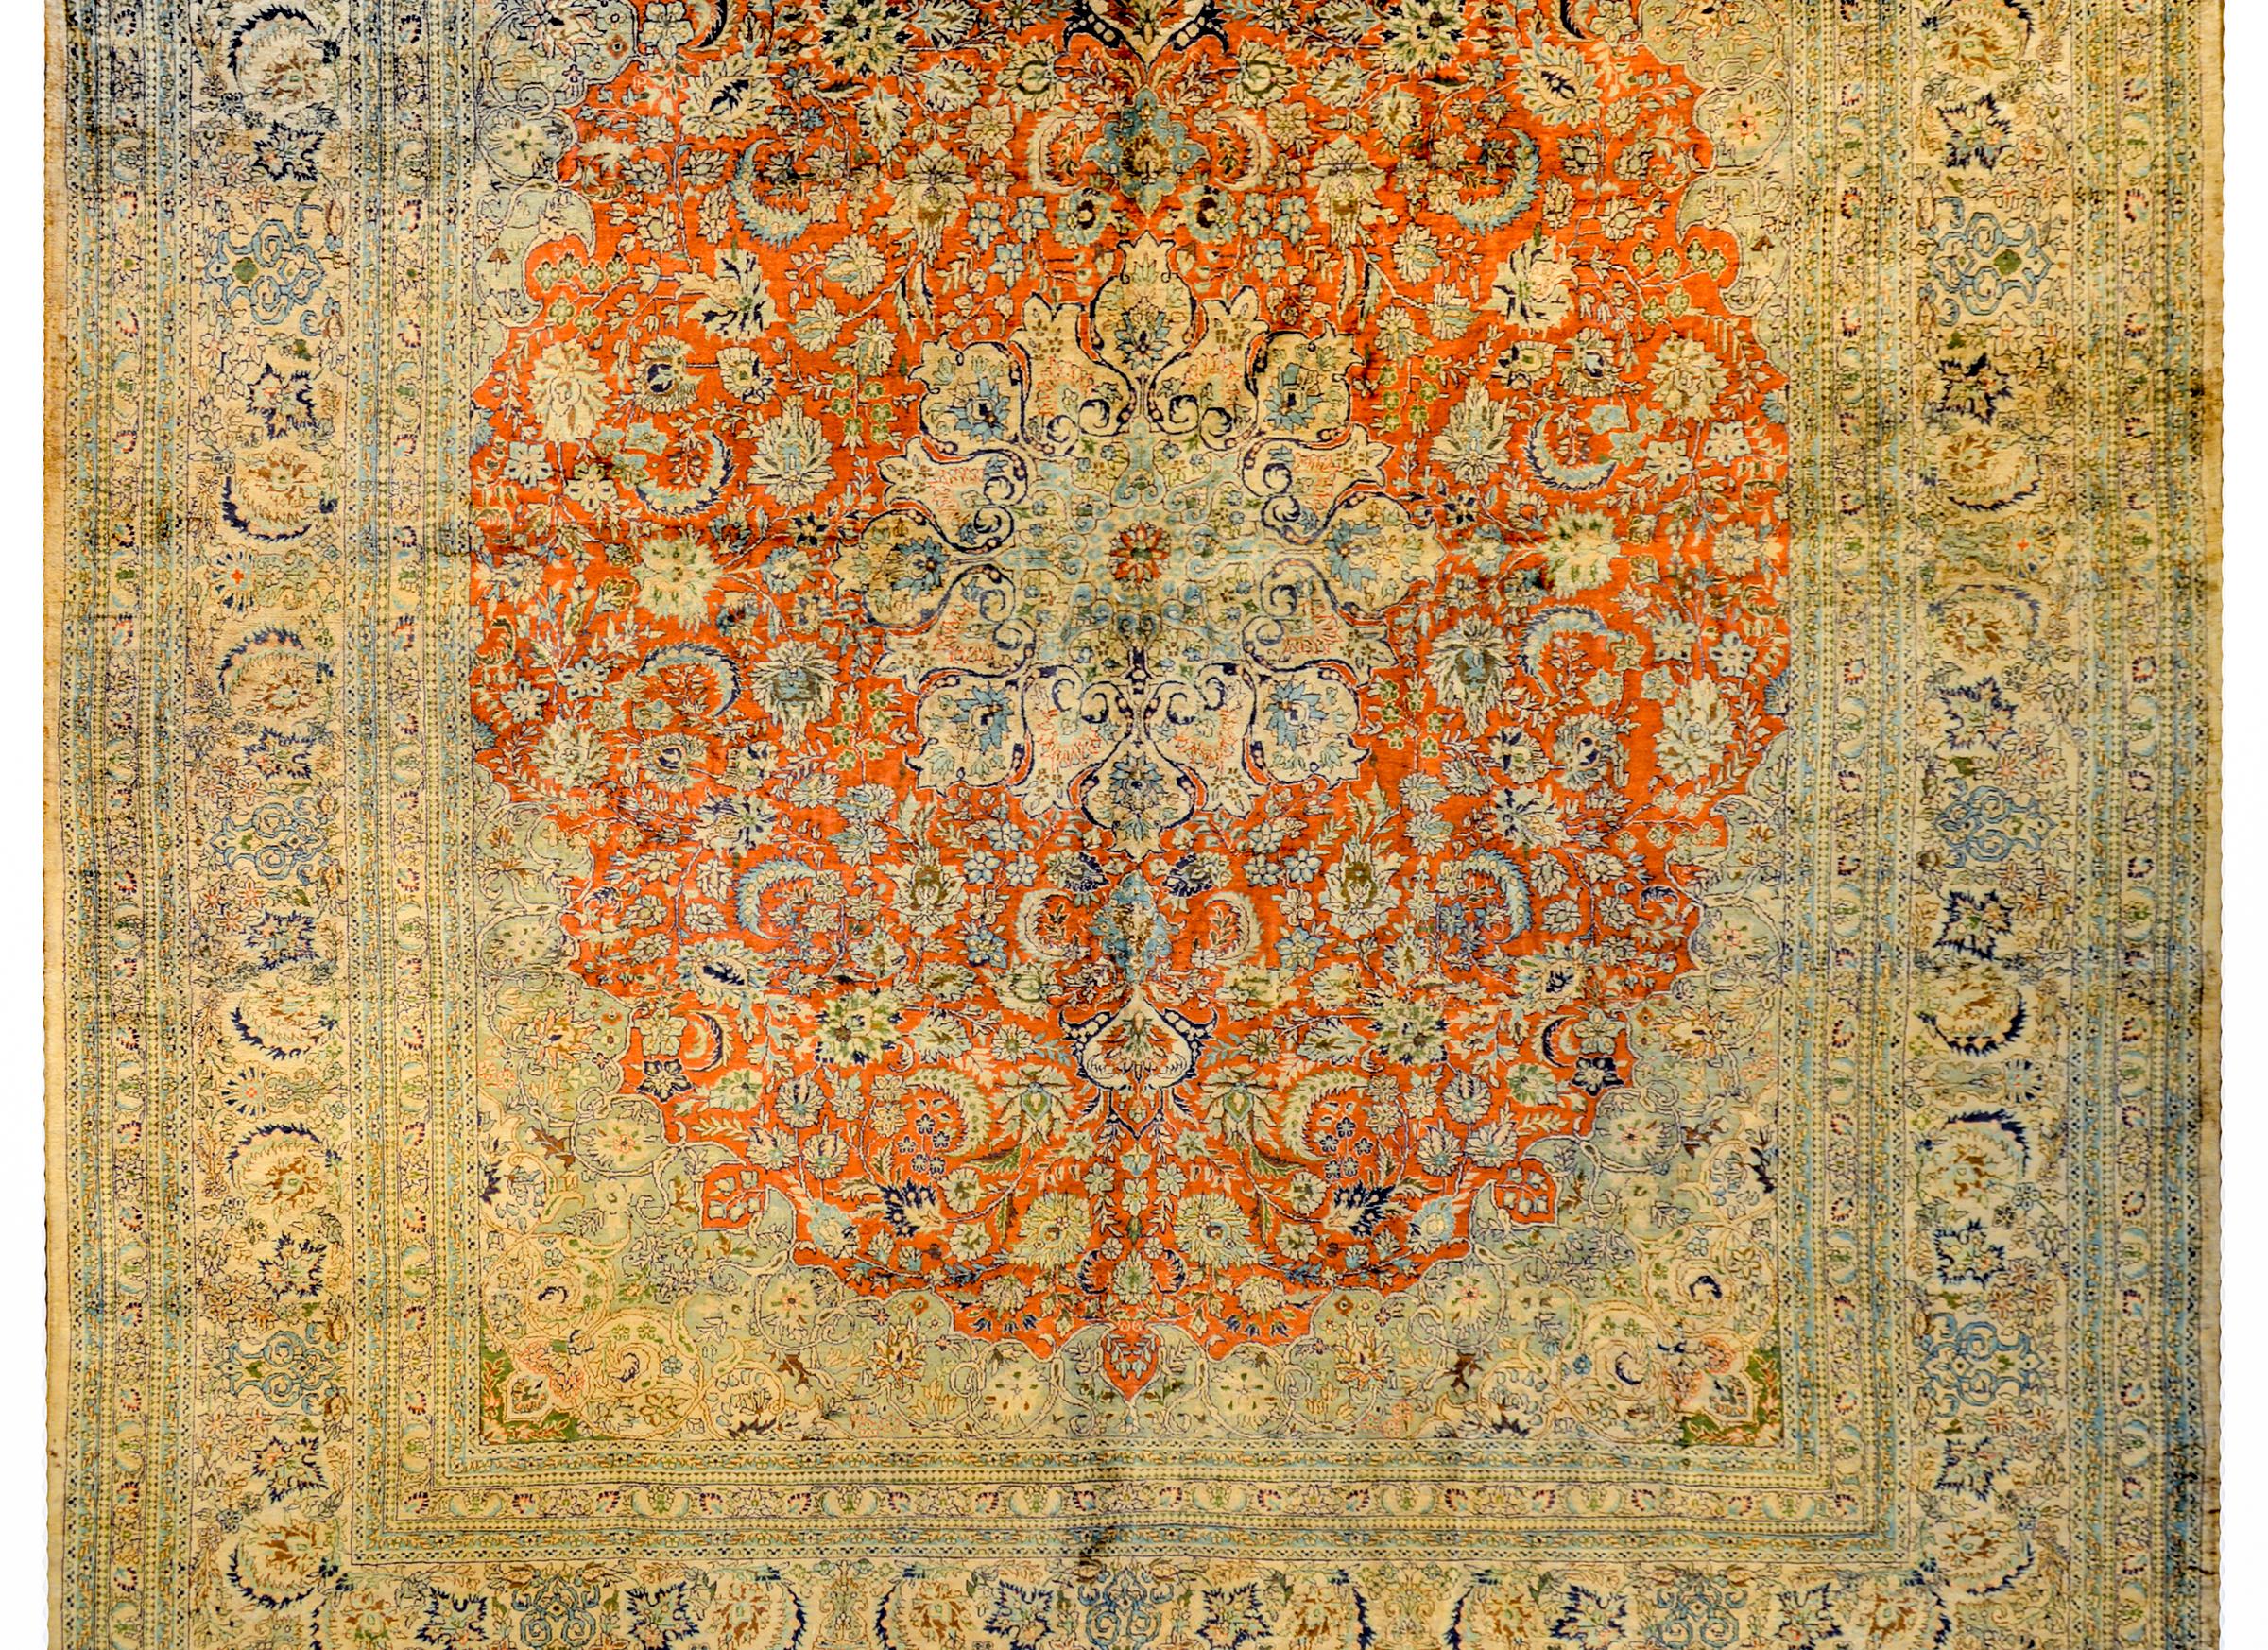 An incredible mid-20th century Indian 100% silk Isfahan rug with a fantastic large scale central sixteen-lobed floral medallion amidst a burnt orange field of myriad flowers and leaves. The border is unmatched in excellence with dozens of thinly